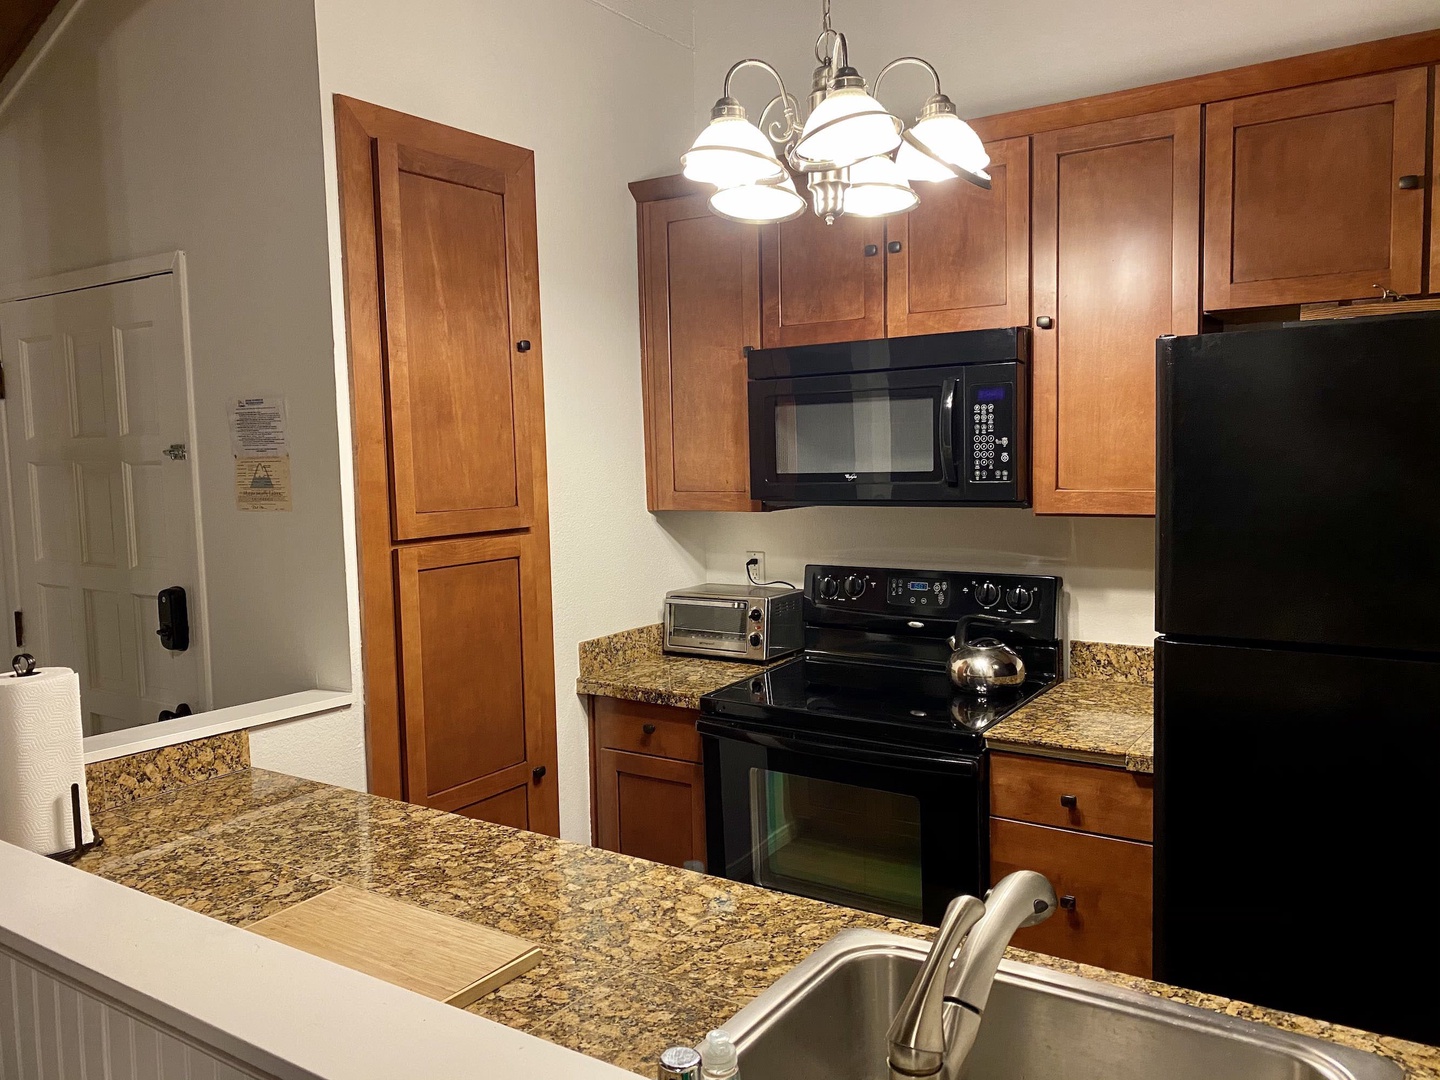 Fully equipped kitchen with electric stovetop, toaster oven and more